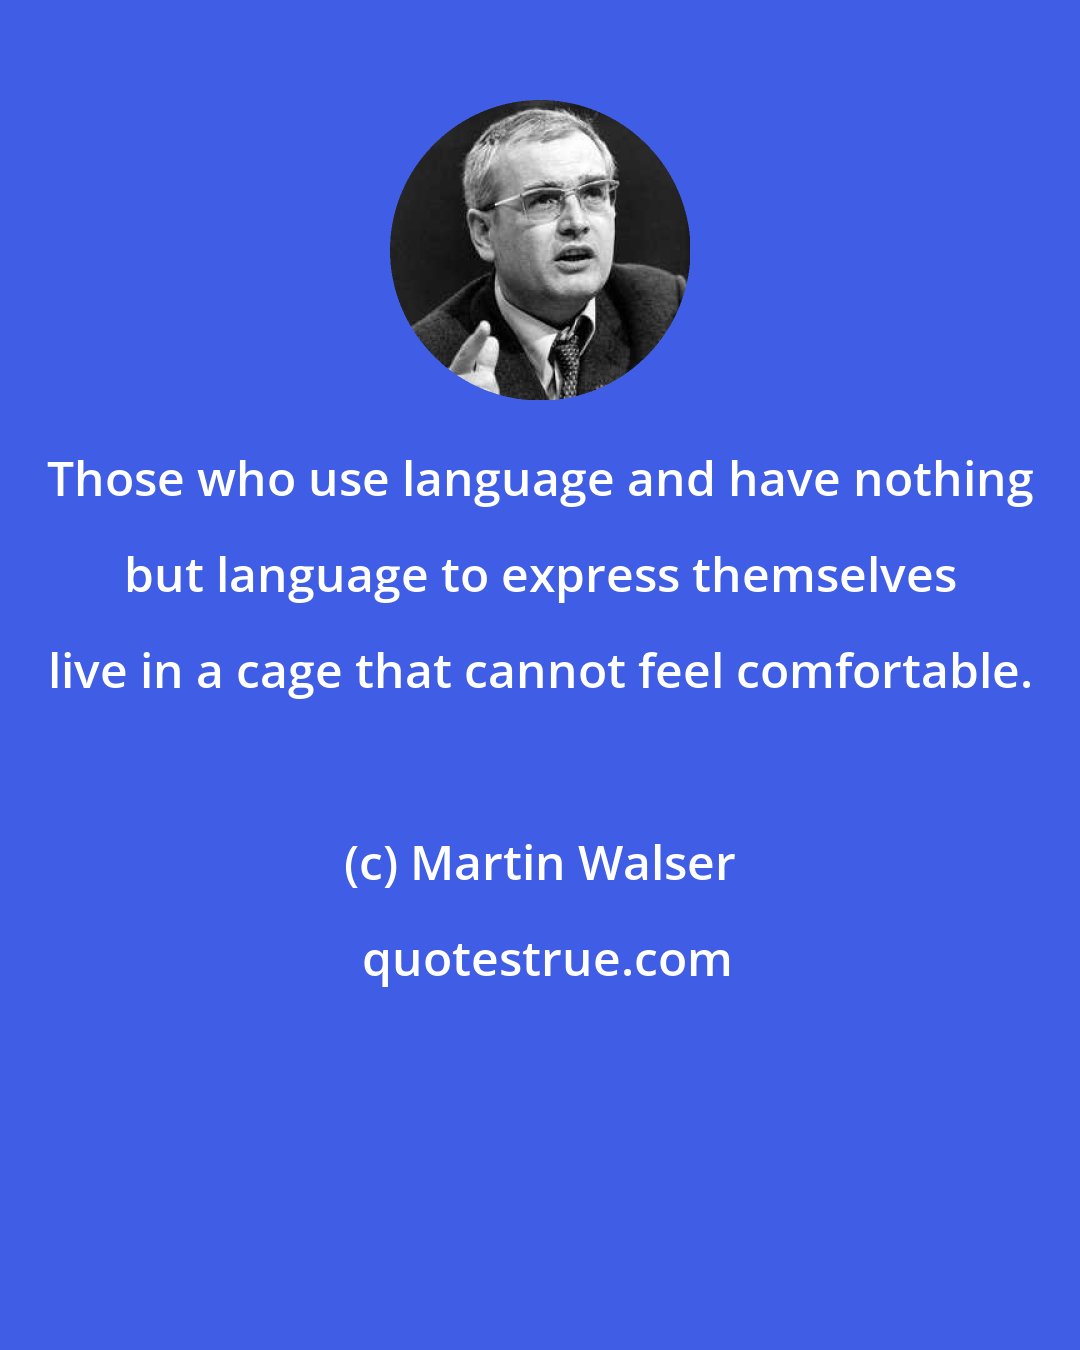 Martin Walser: Those who use language and have nothing but language to express themselves live in a cage that cannot feel comfortable.